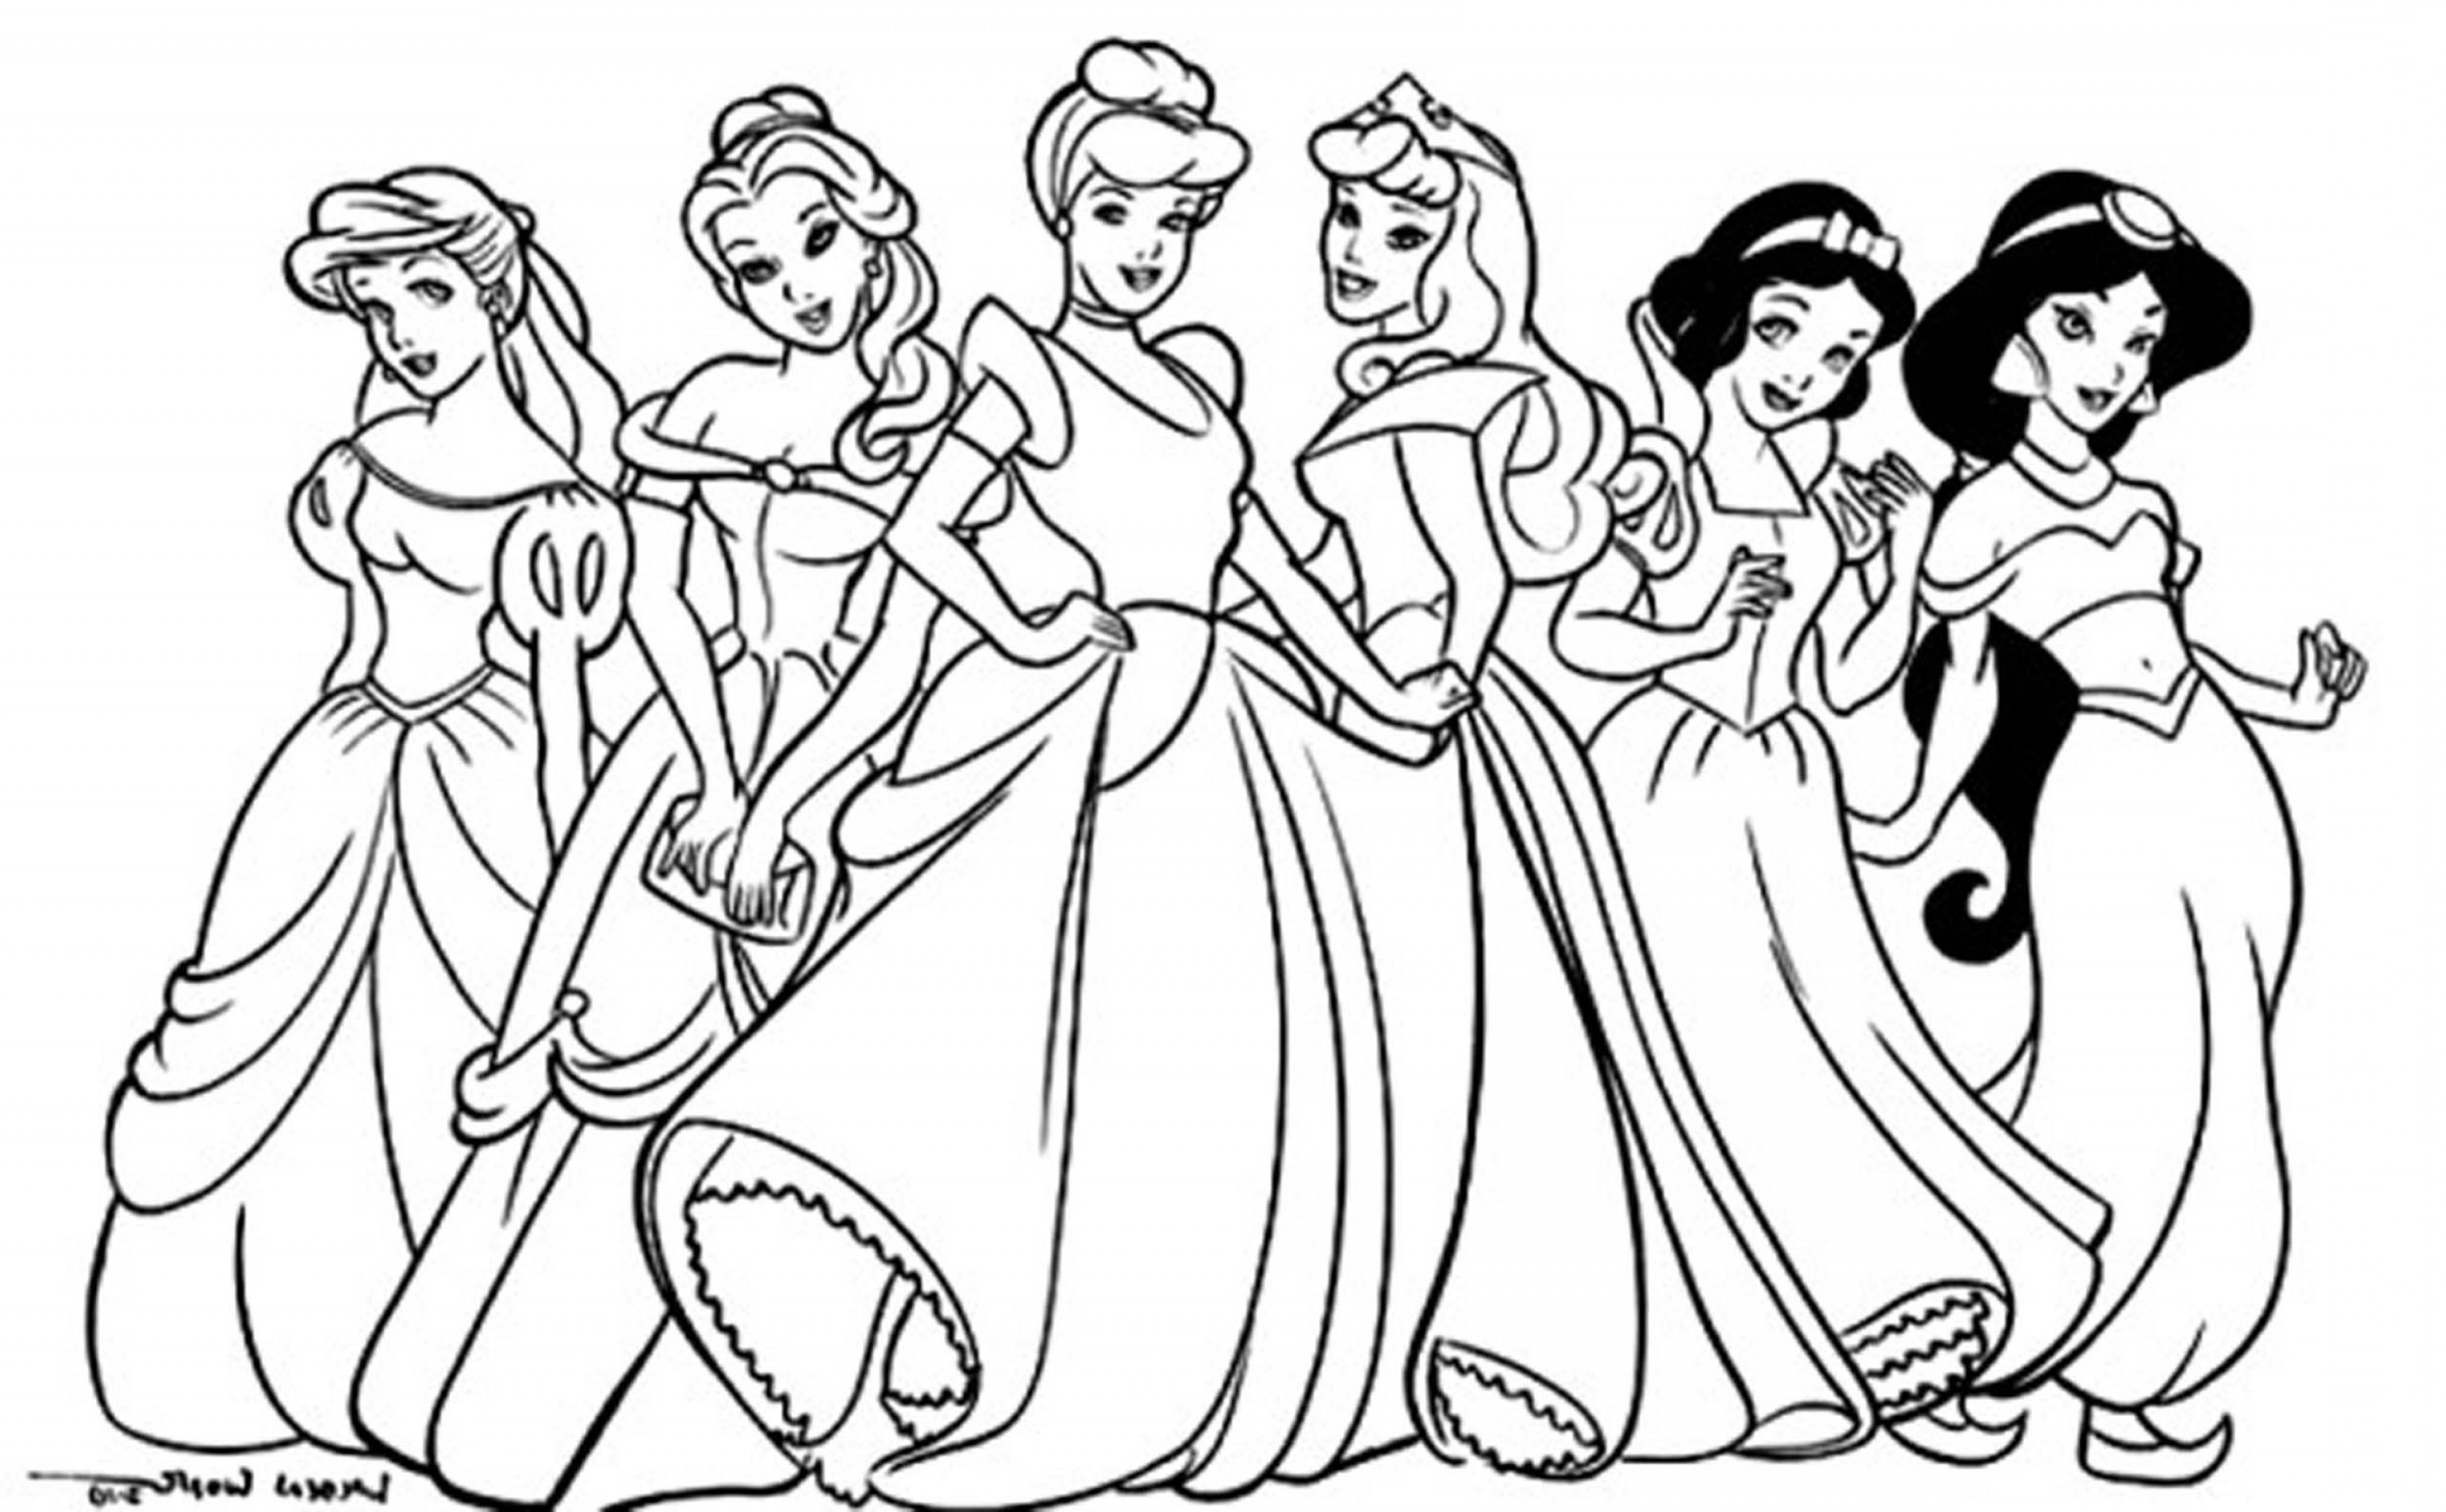 Disney Princess Coloring Pages Printable Coloring Pages Free Princess Activity Pages Printable Coloring To